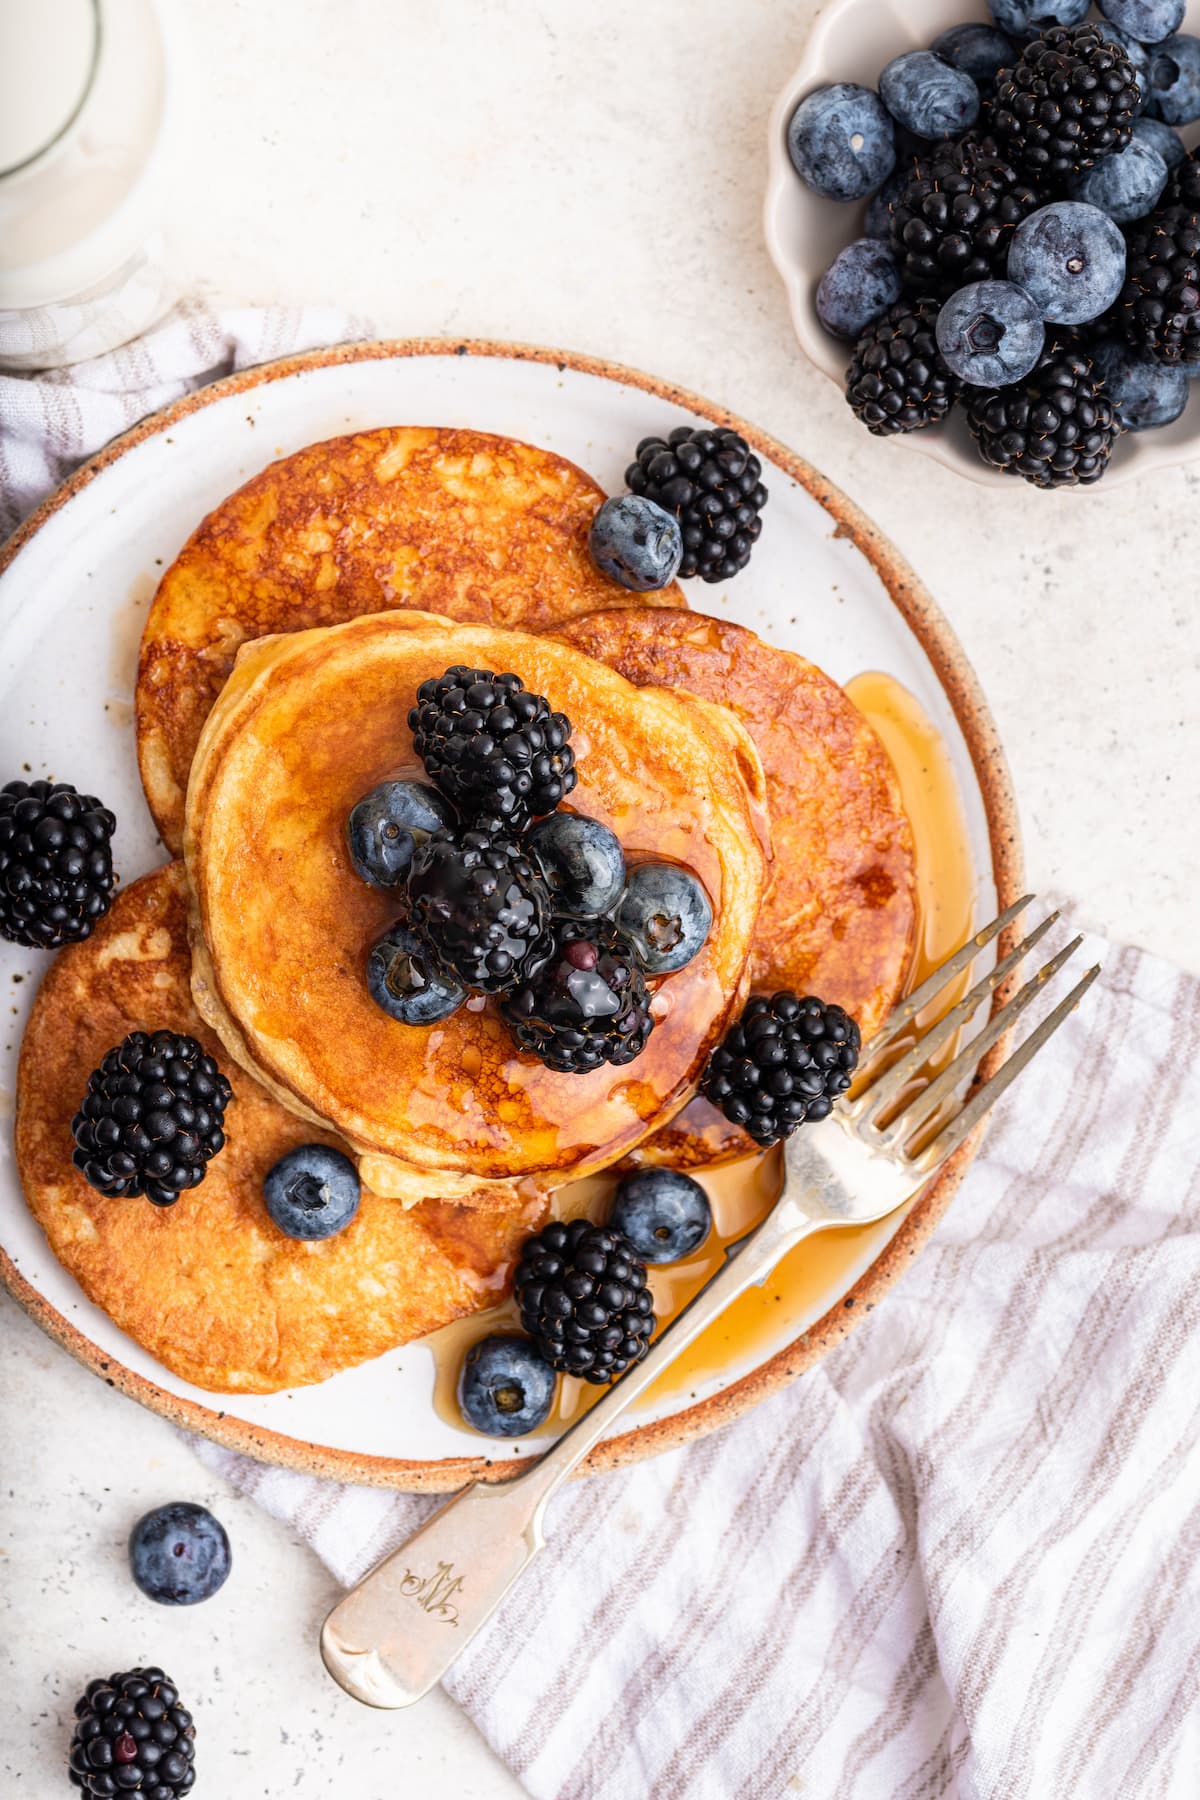 Multiple cottage cheese pancakes on a plate with a fork. The pancakes are topped off with maple syrup and fresh berries.